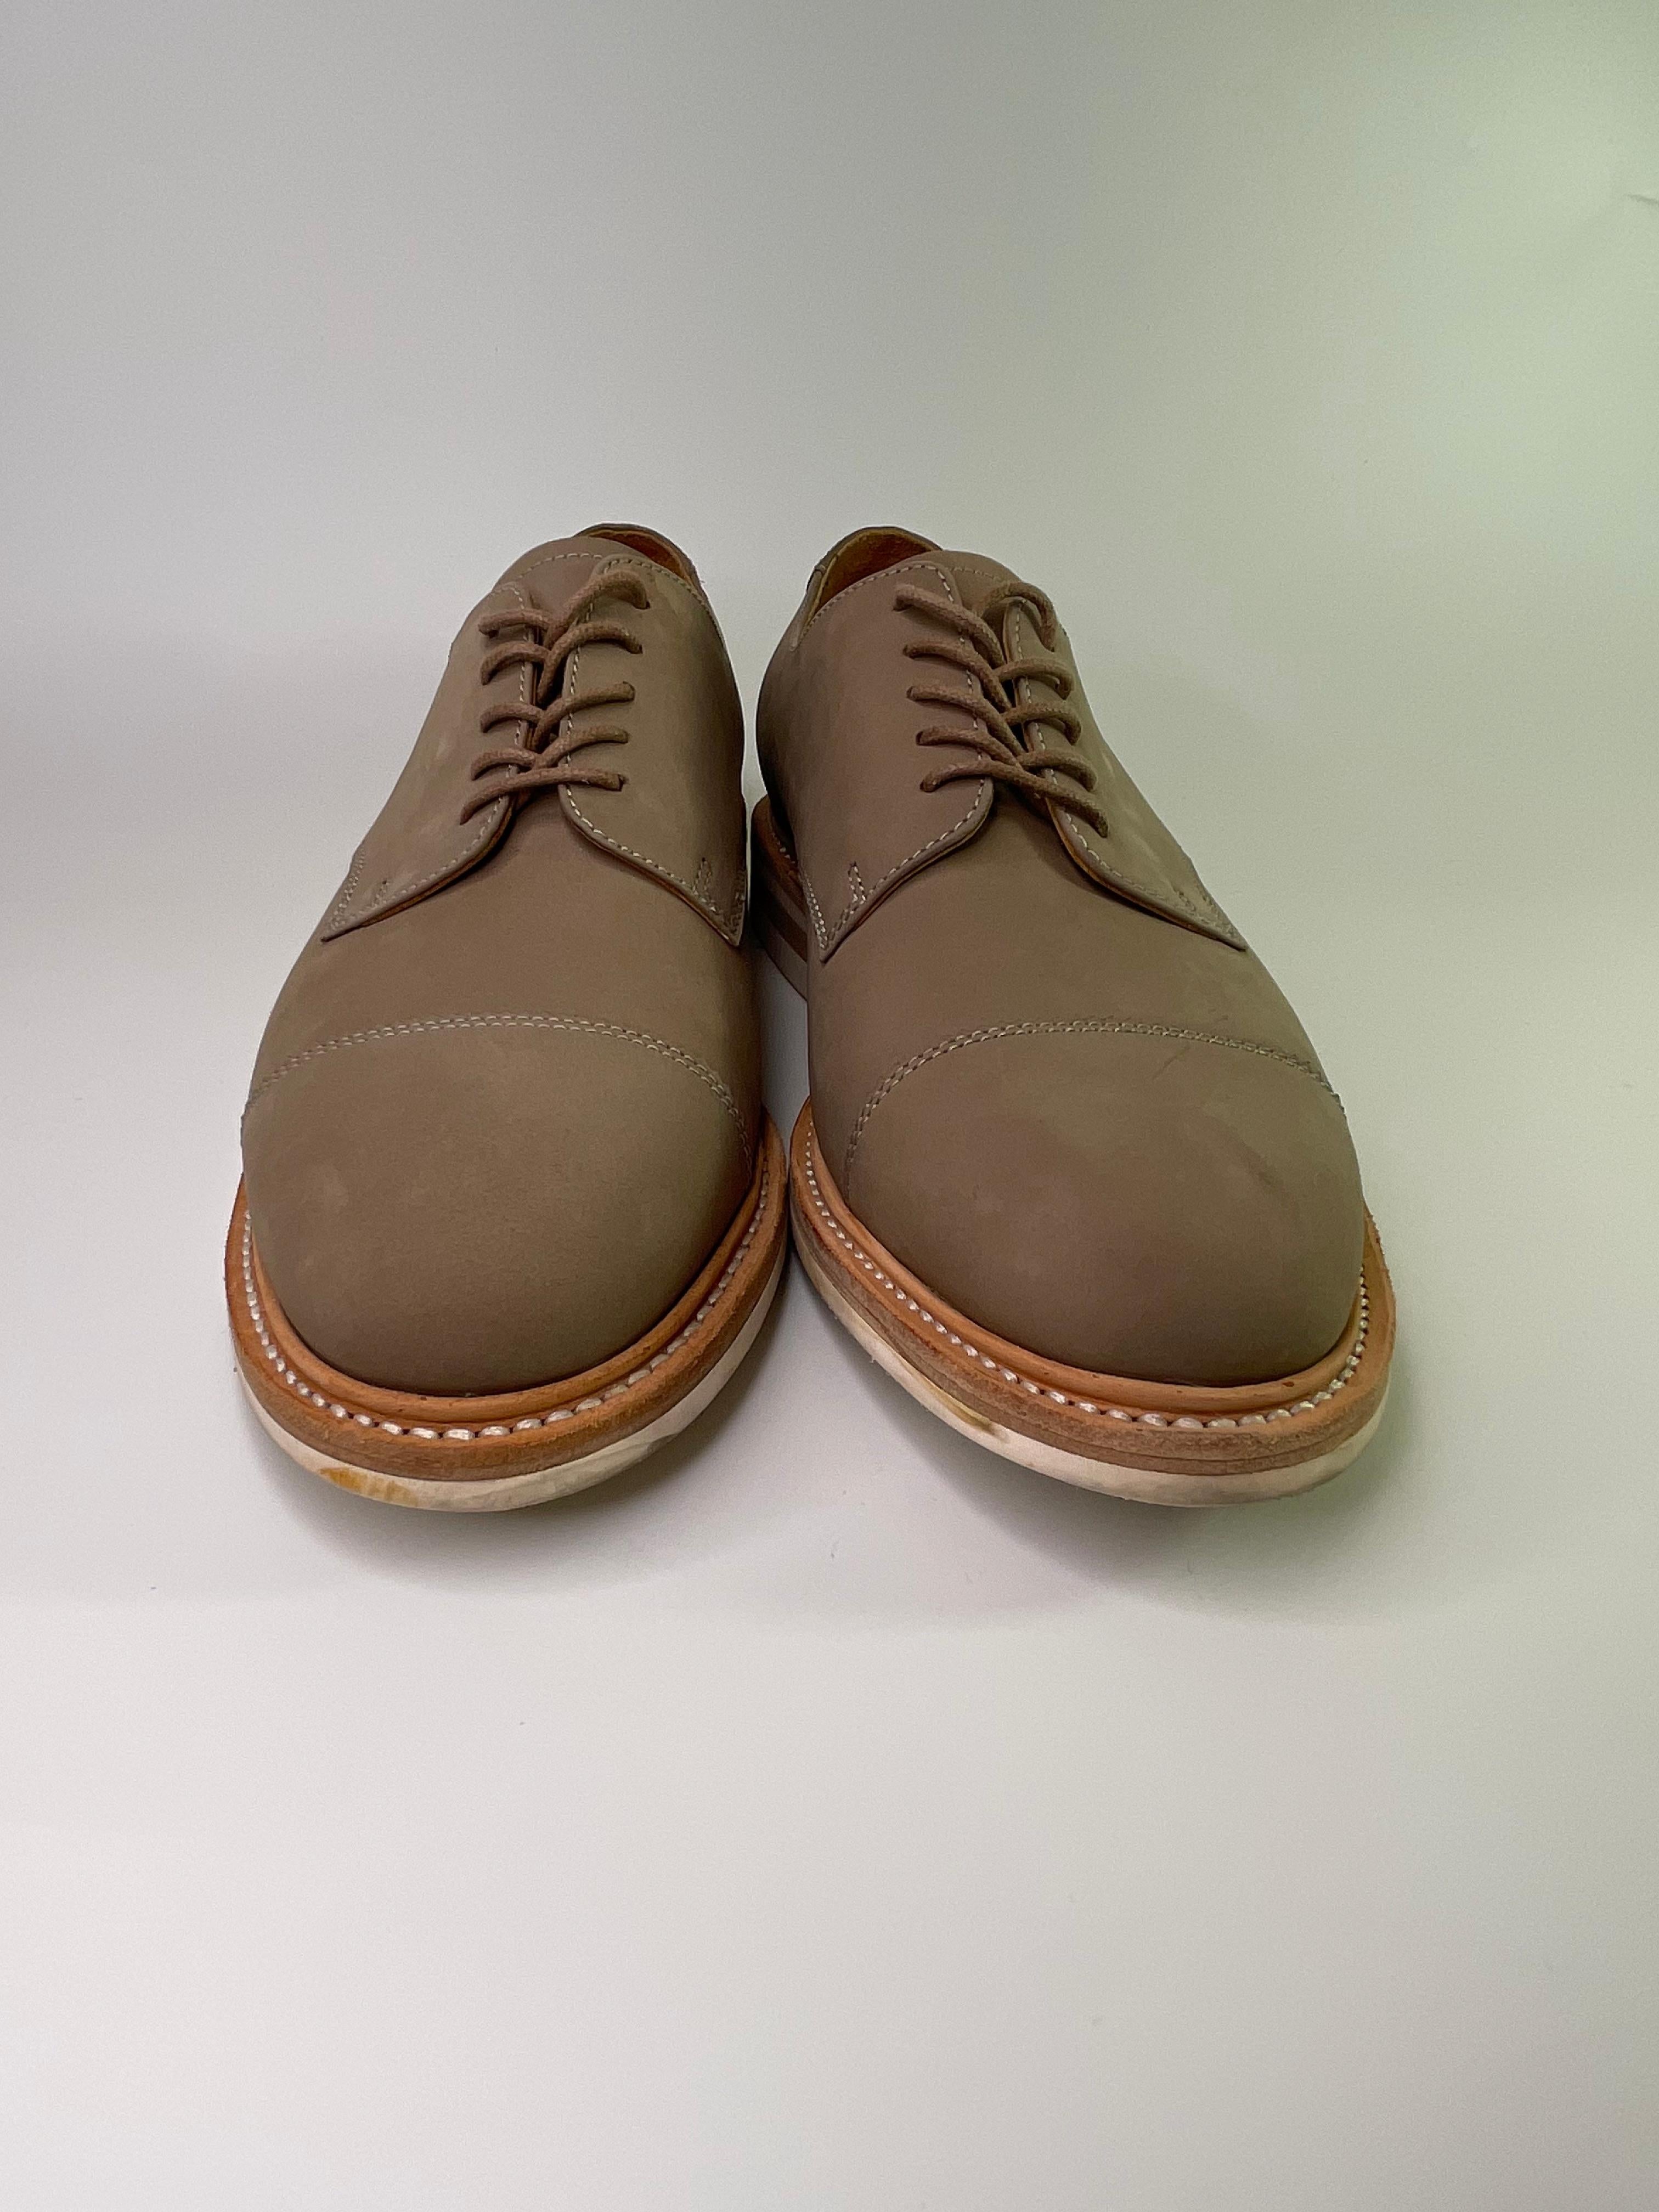 COLOR: Brown / beige
MATERIAL: Leather / vero cuoio
SIZE: 11 US
COMES WITH: Shoe box
CONDITION: Signs of use consistent with light use. Used once. Stains on the bottoms and sides. Small marks.

Made in